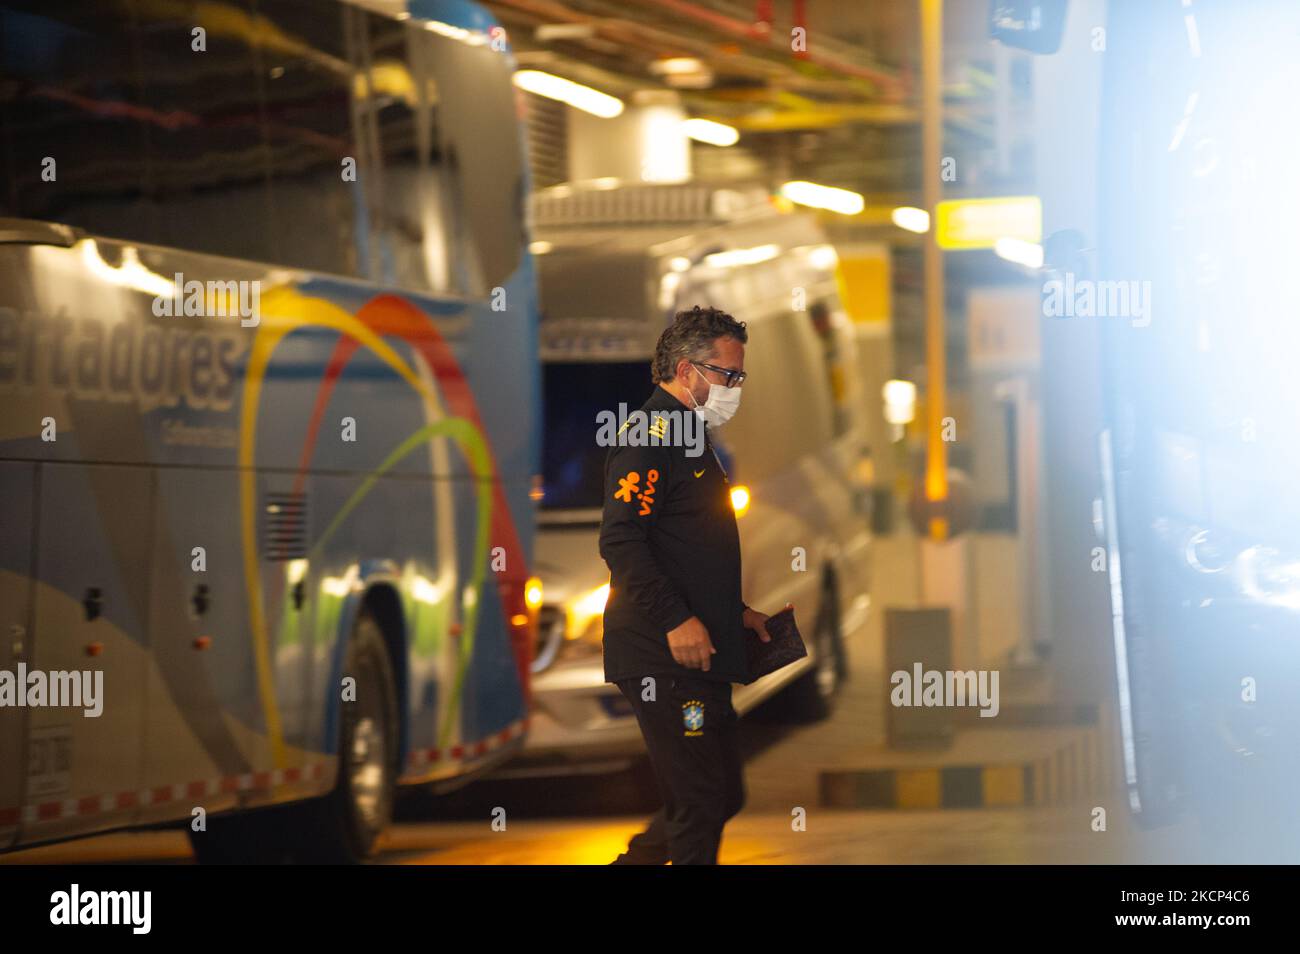 A member of Brazil's national team tecnical comission boards a bus as members of the Brazil federation of football team board their bus at the Grand Hyatt Hotel in Bogota, Colombia to be transported to the Techo stadium for practice against the qualifying matches between Venezuela and Colombia, on October 4, 2021. (Photo by Sebastian Barros/NurPhoto) Stock Photo